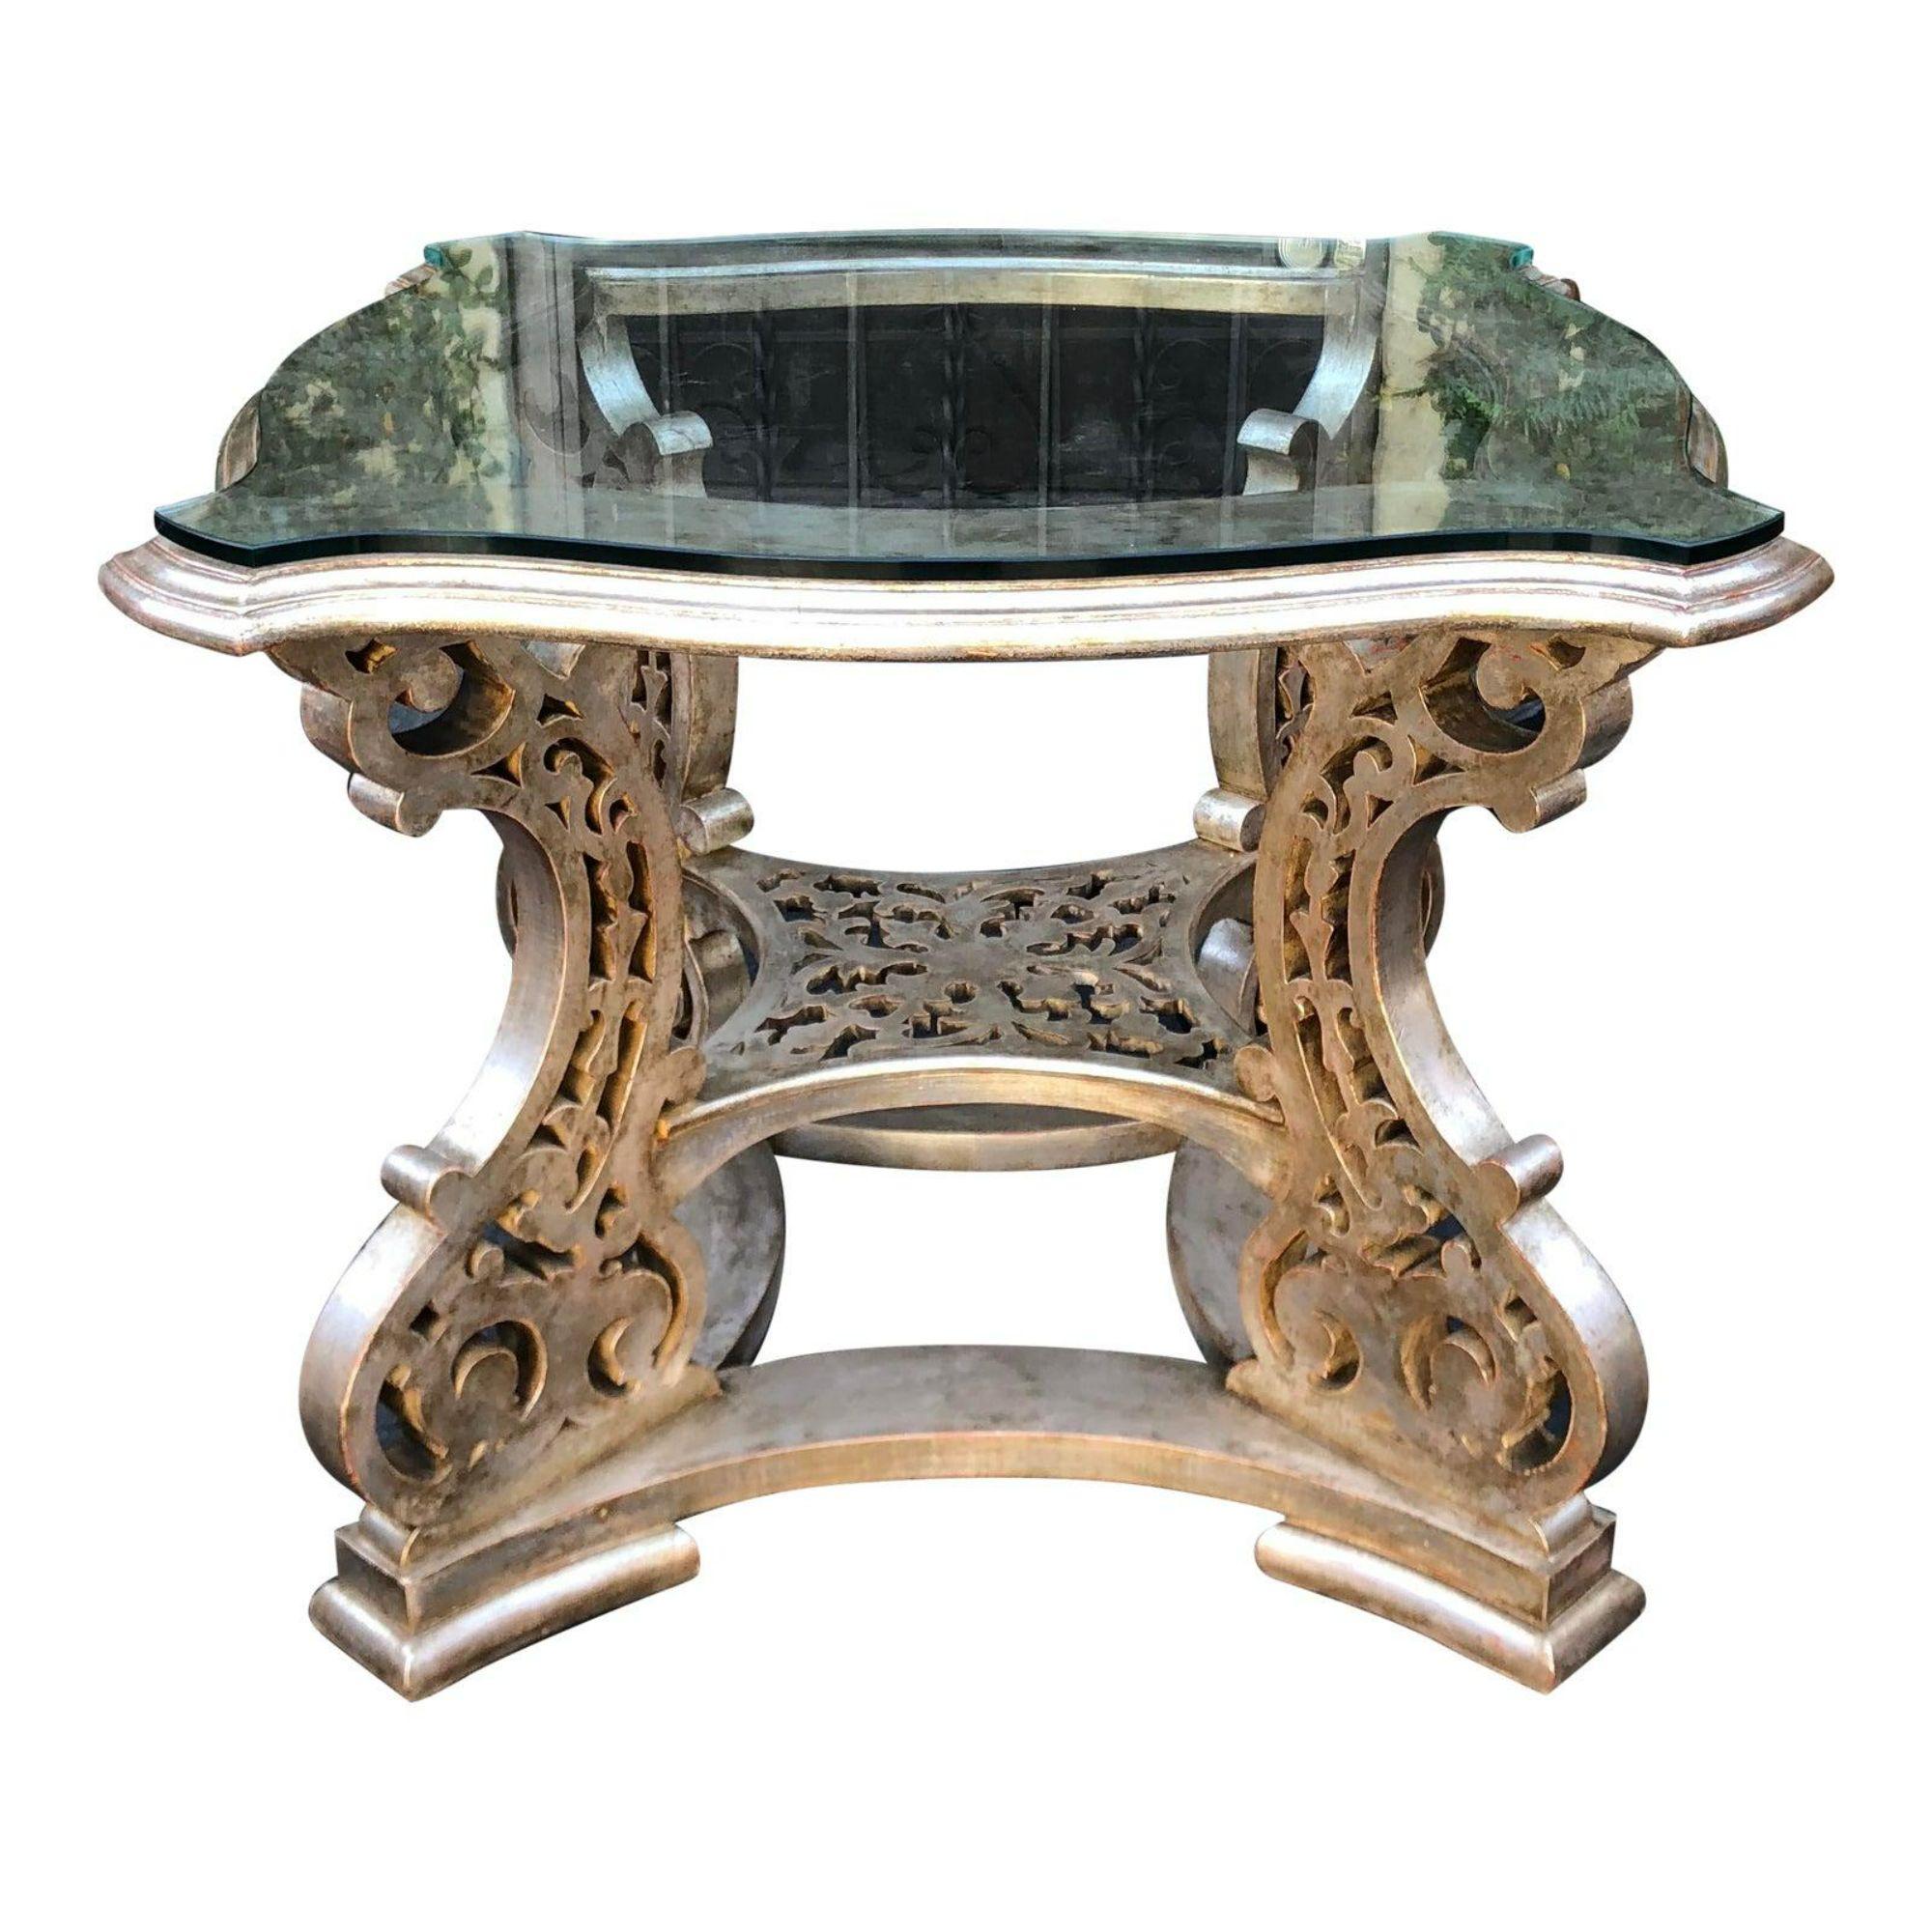 Regency Style silver silver giltwood designer center table.

Additional information: 
Materials: Giltwood, Silver
Color: Silver
Period: Early 20th century.
Place of Origin: North America
Styles: Regency
Table Shape: Other (unique